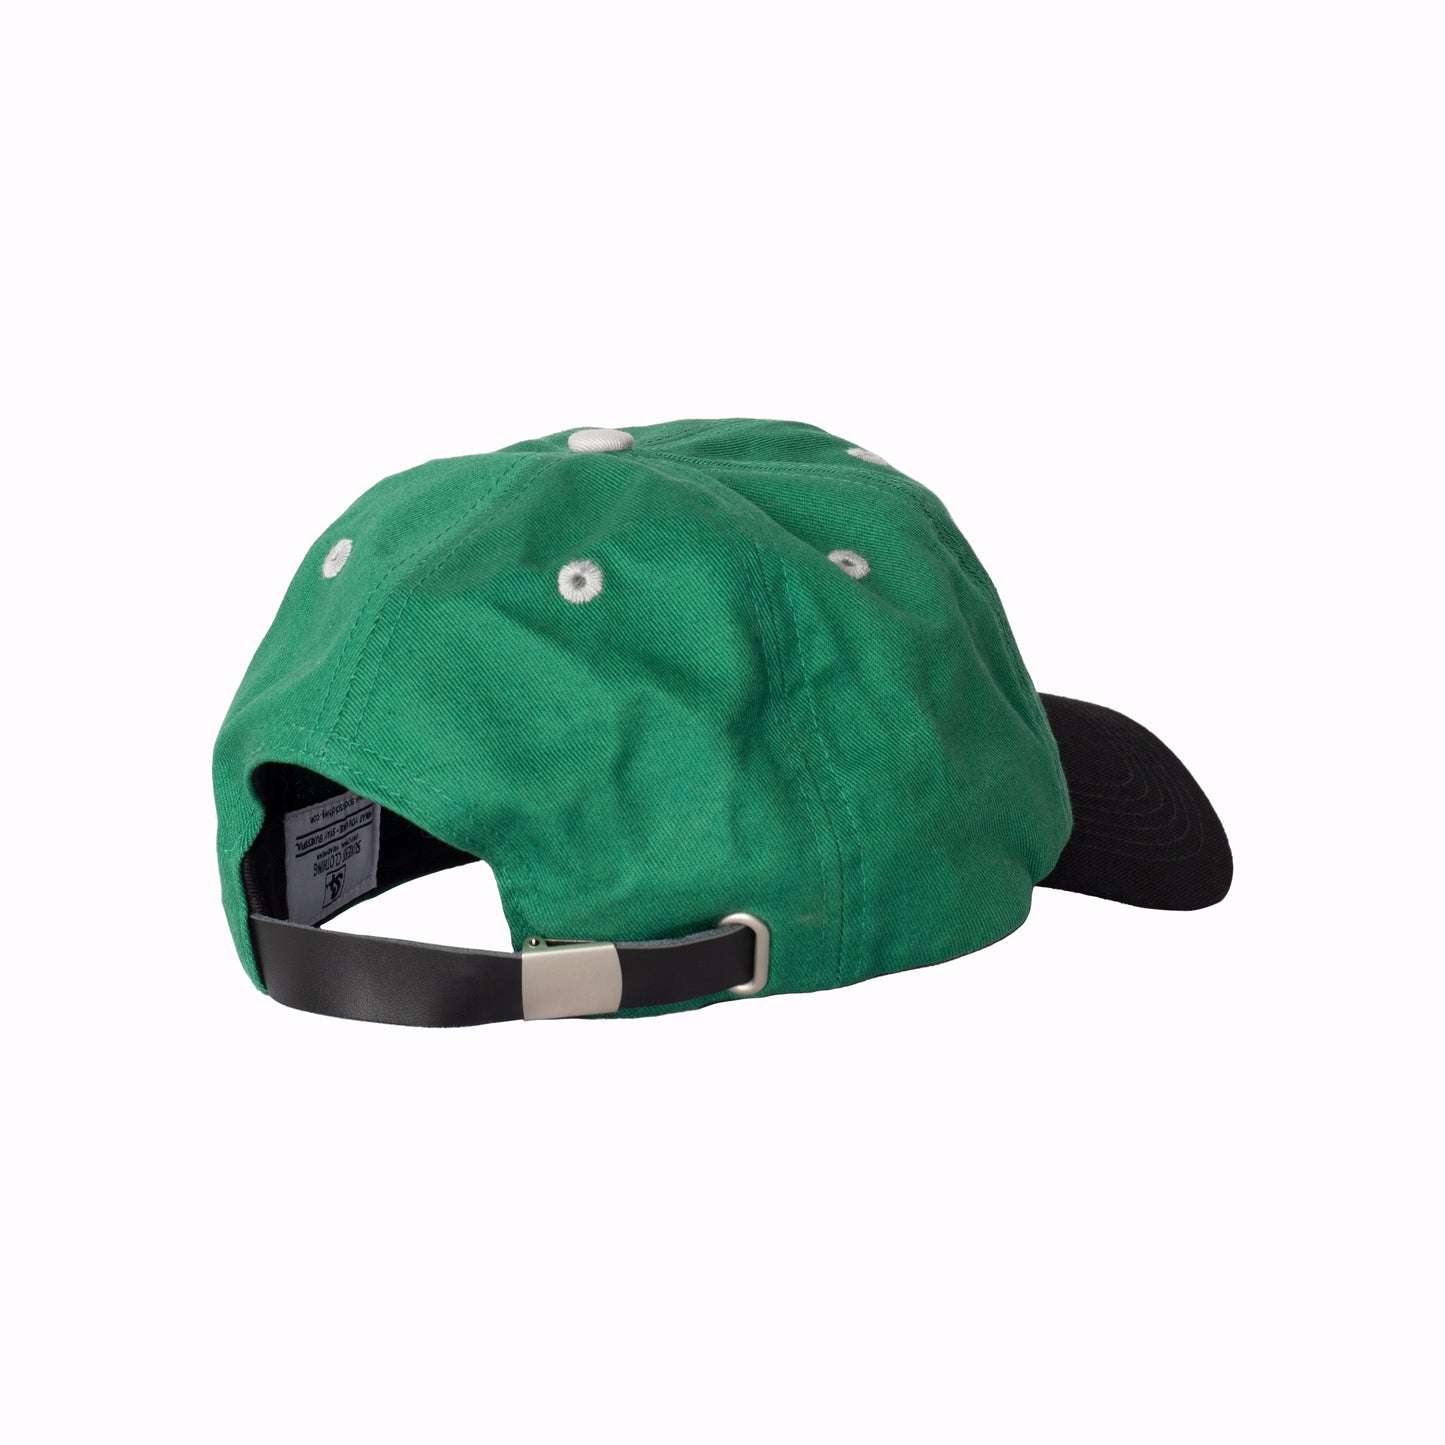 SX Dad Green Hat | Green Dad Hats | Suxess